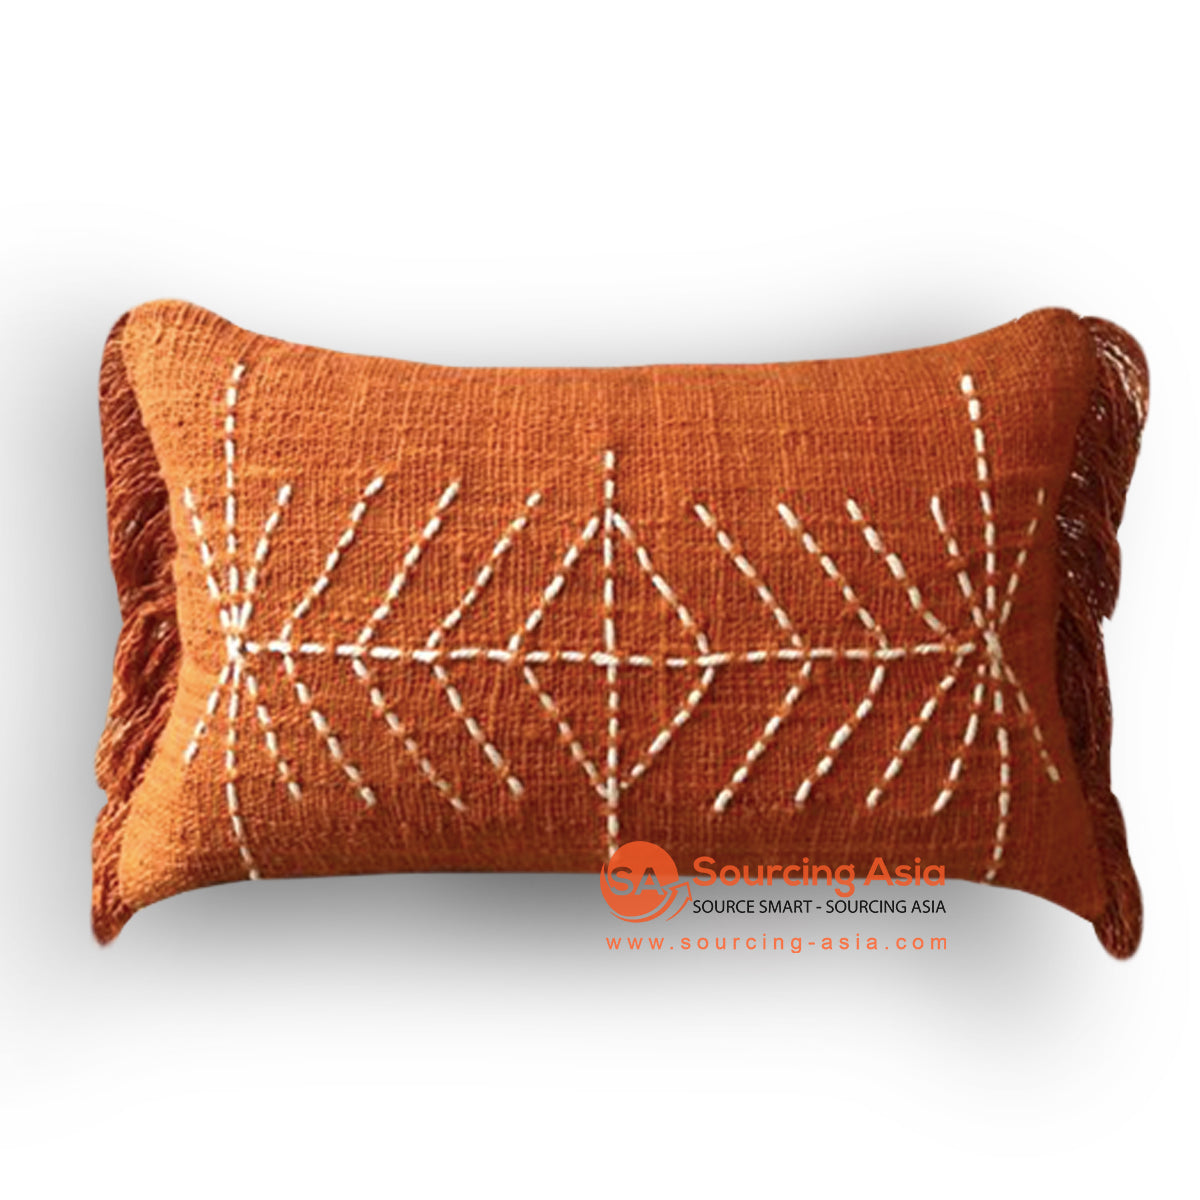 HIP018 ORANGE TUMANGGAL FABRIC HAND-STITCHED RECTANGULAR CUSHION WITH EMBROIDERY AND FRINGE (PRICE WITHOUT INNER)